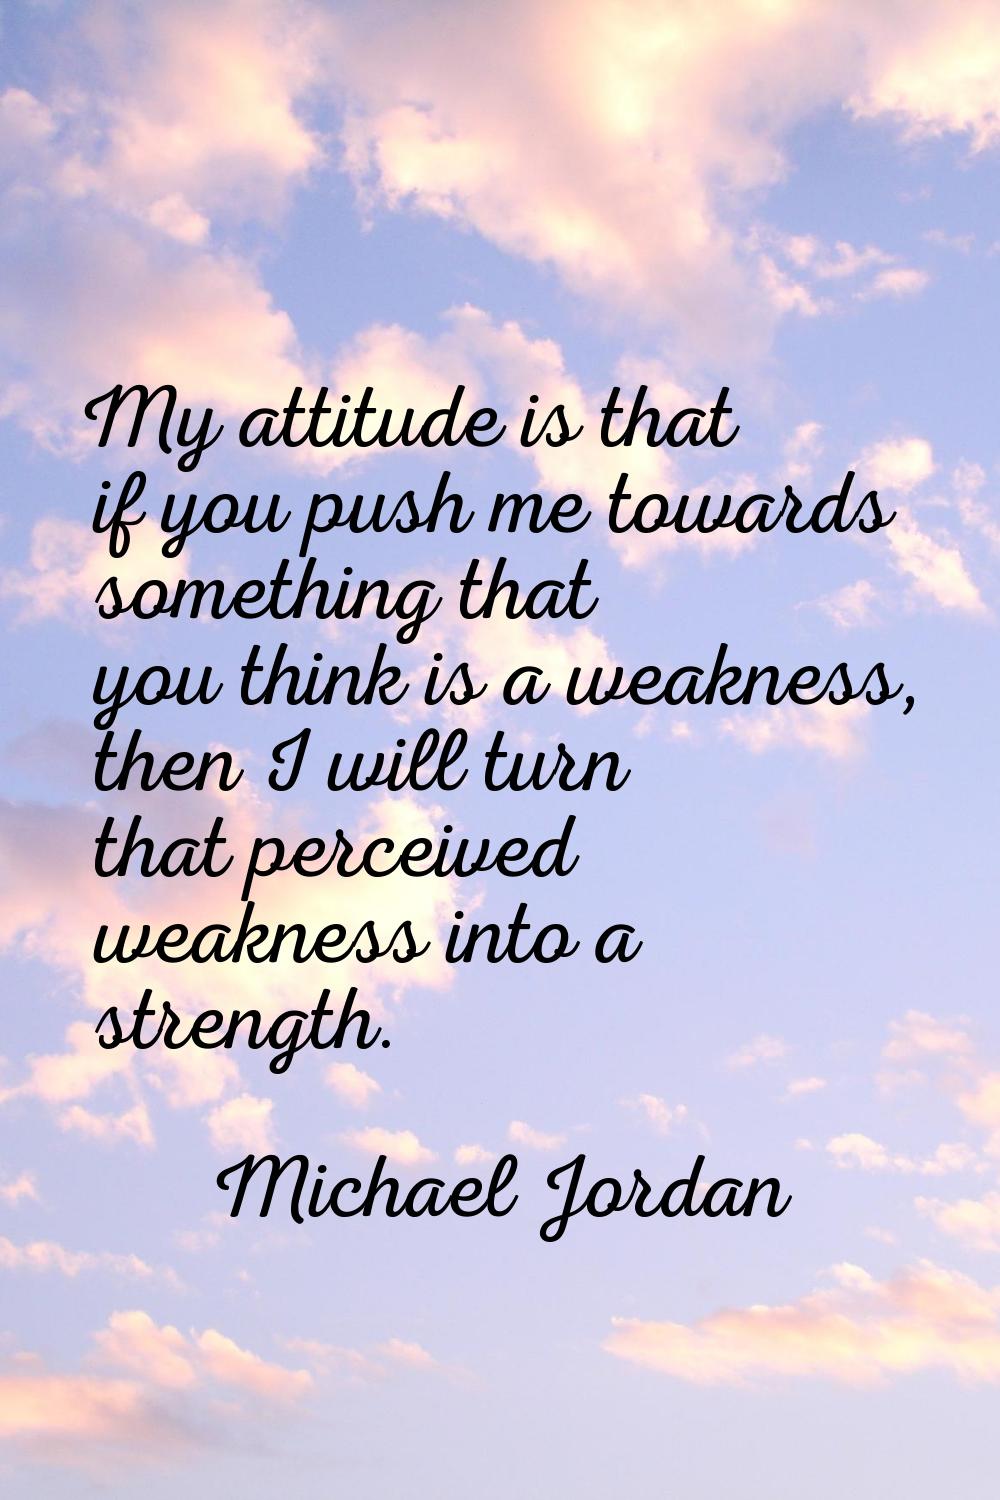 My attitude is that if you push me towards something that you think is a weakness, then I will turn